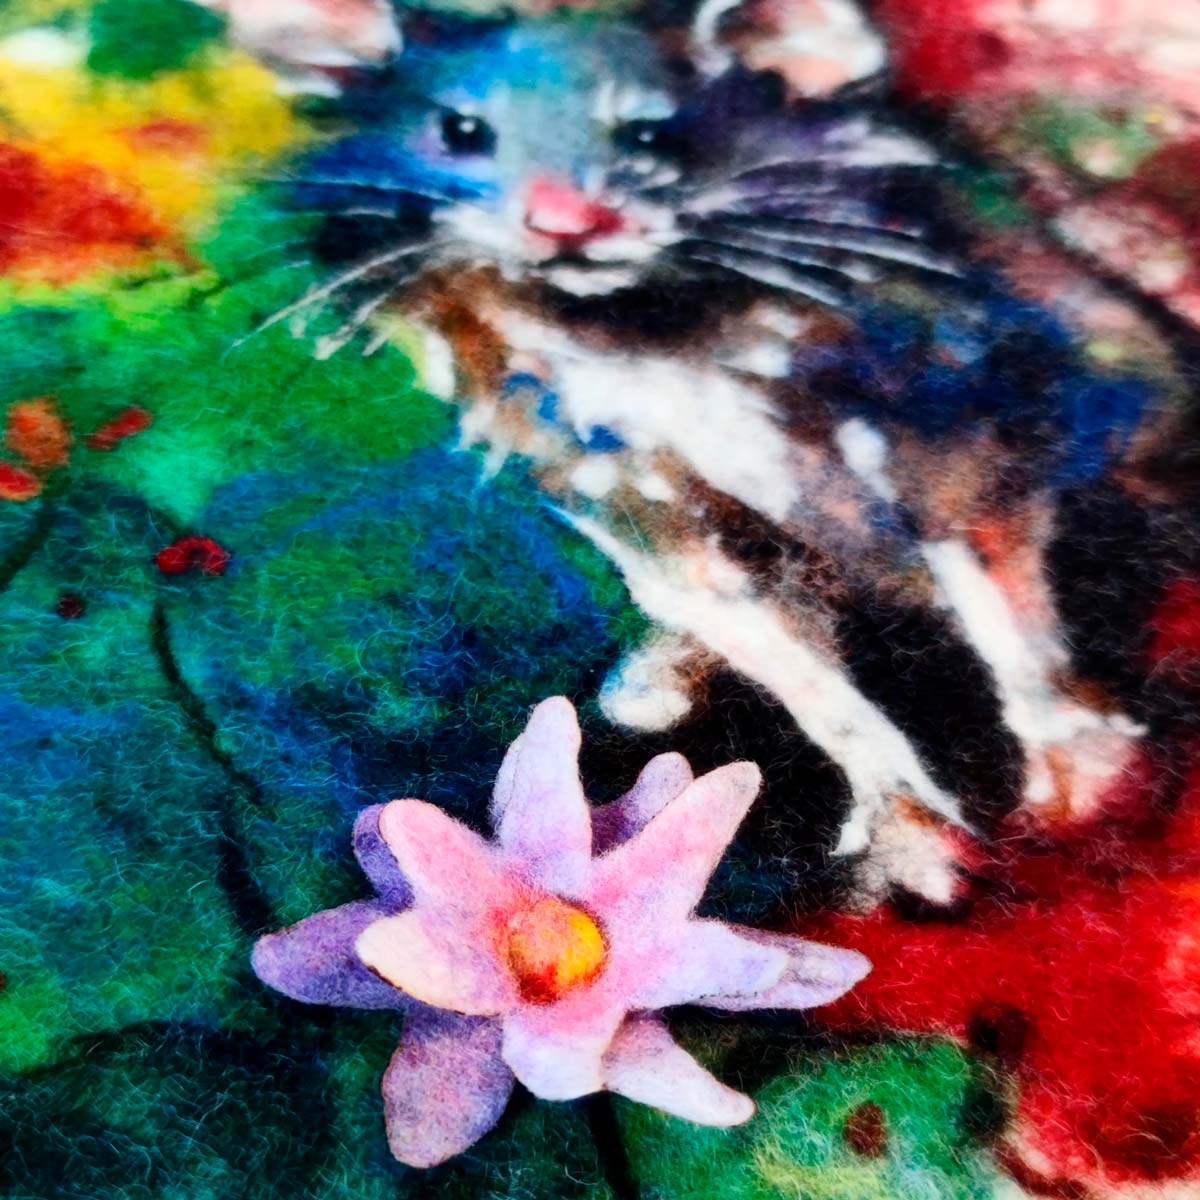 Wool Painting ”The Colorful Adventure of the Mouse”, from the Whimsical Wildlife in Bloom collection